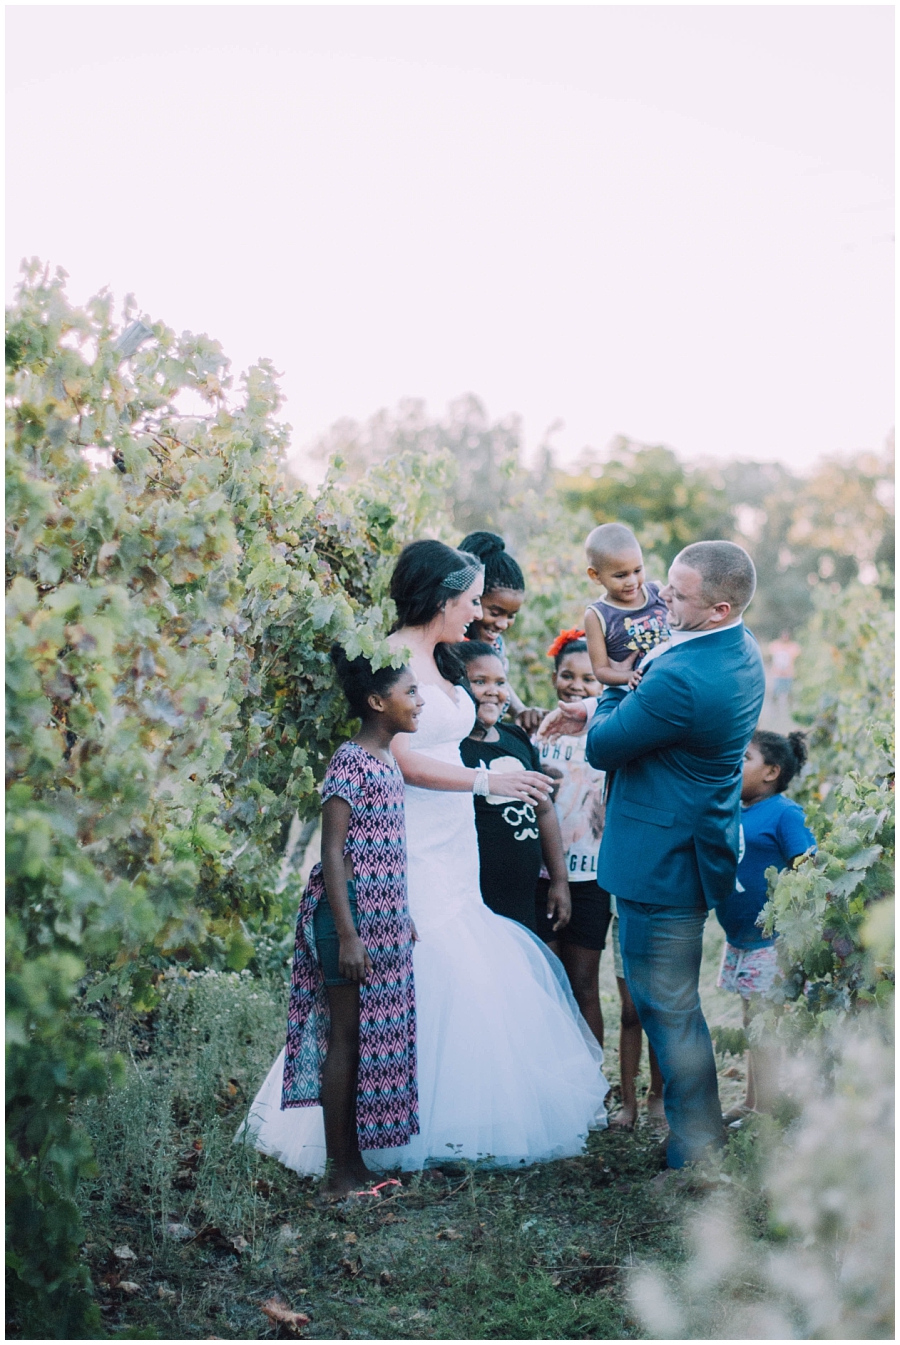 Ronel Kruger Cape Town Wedding and Lifestyle Photographer_3411.jpg